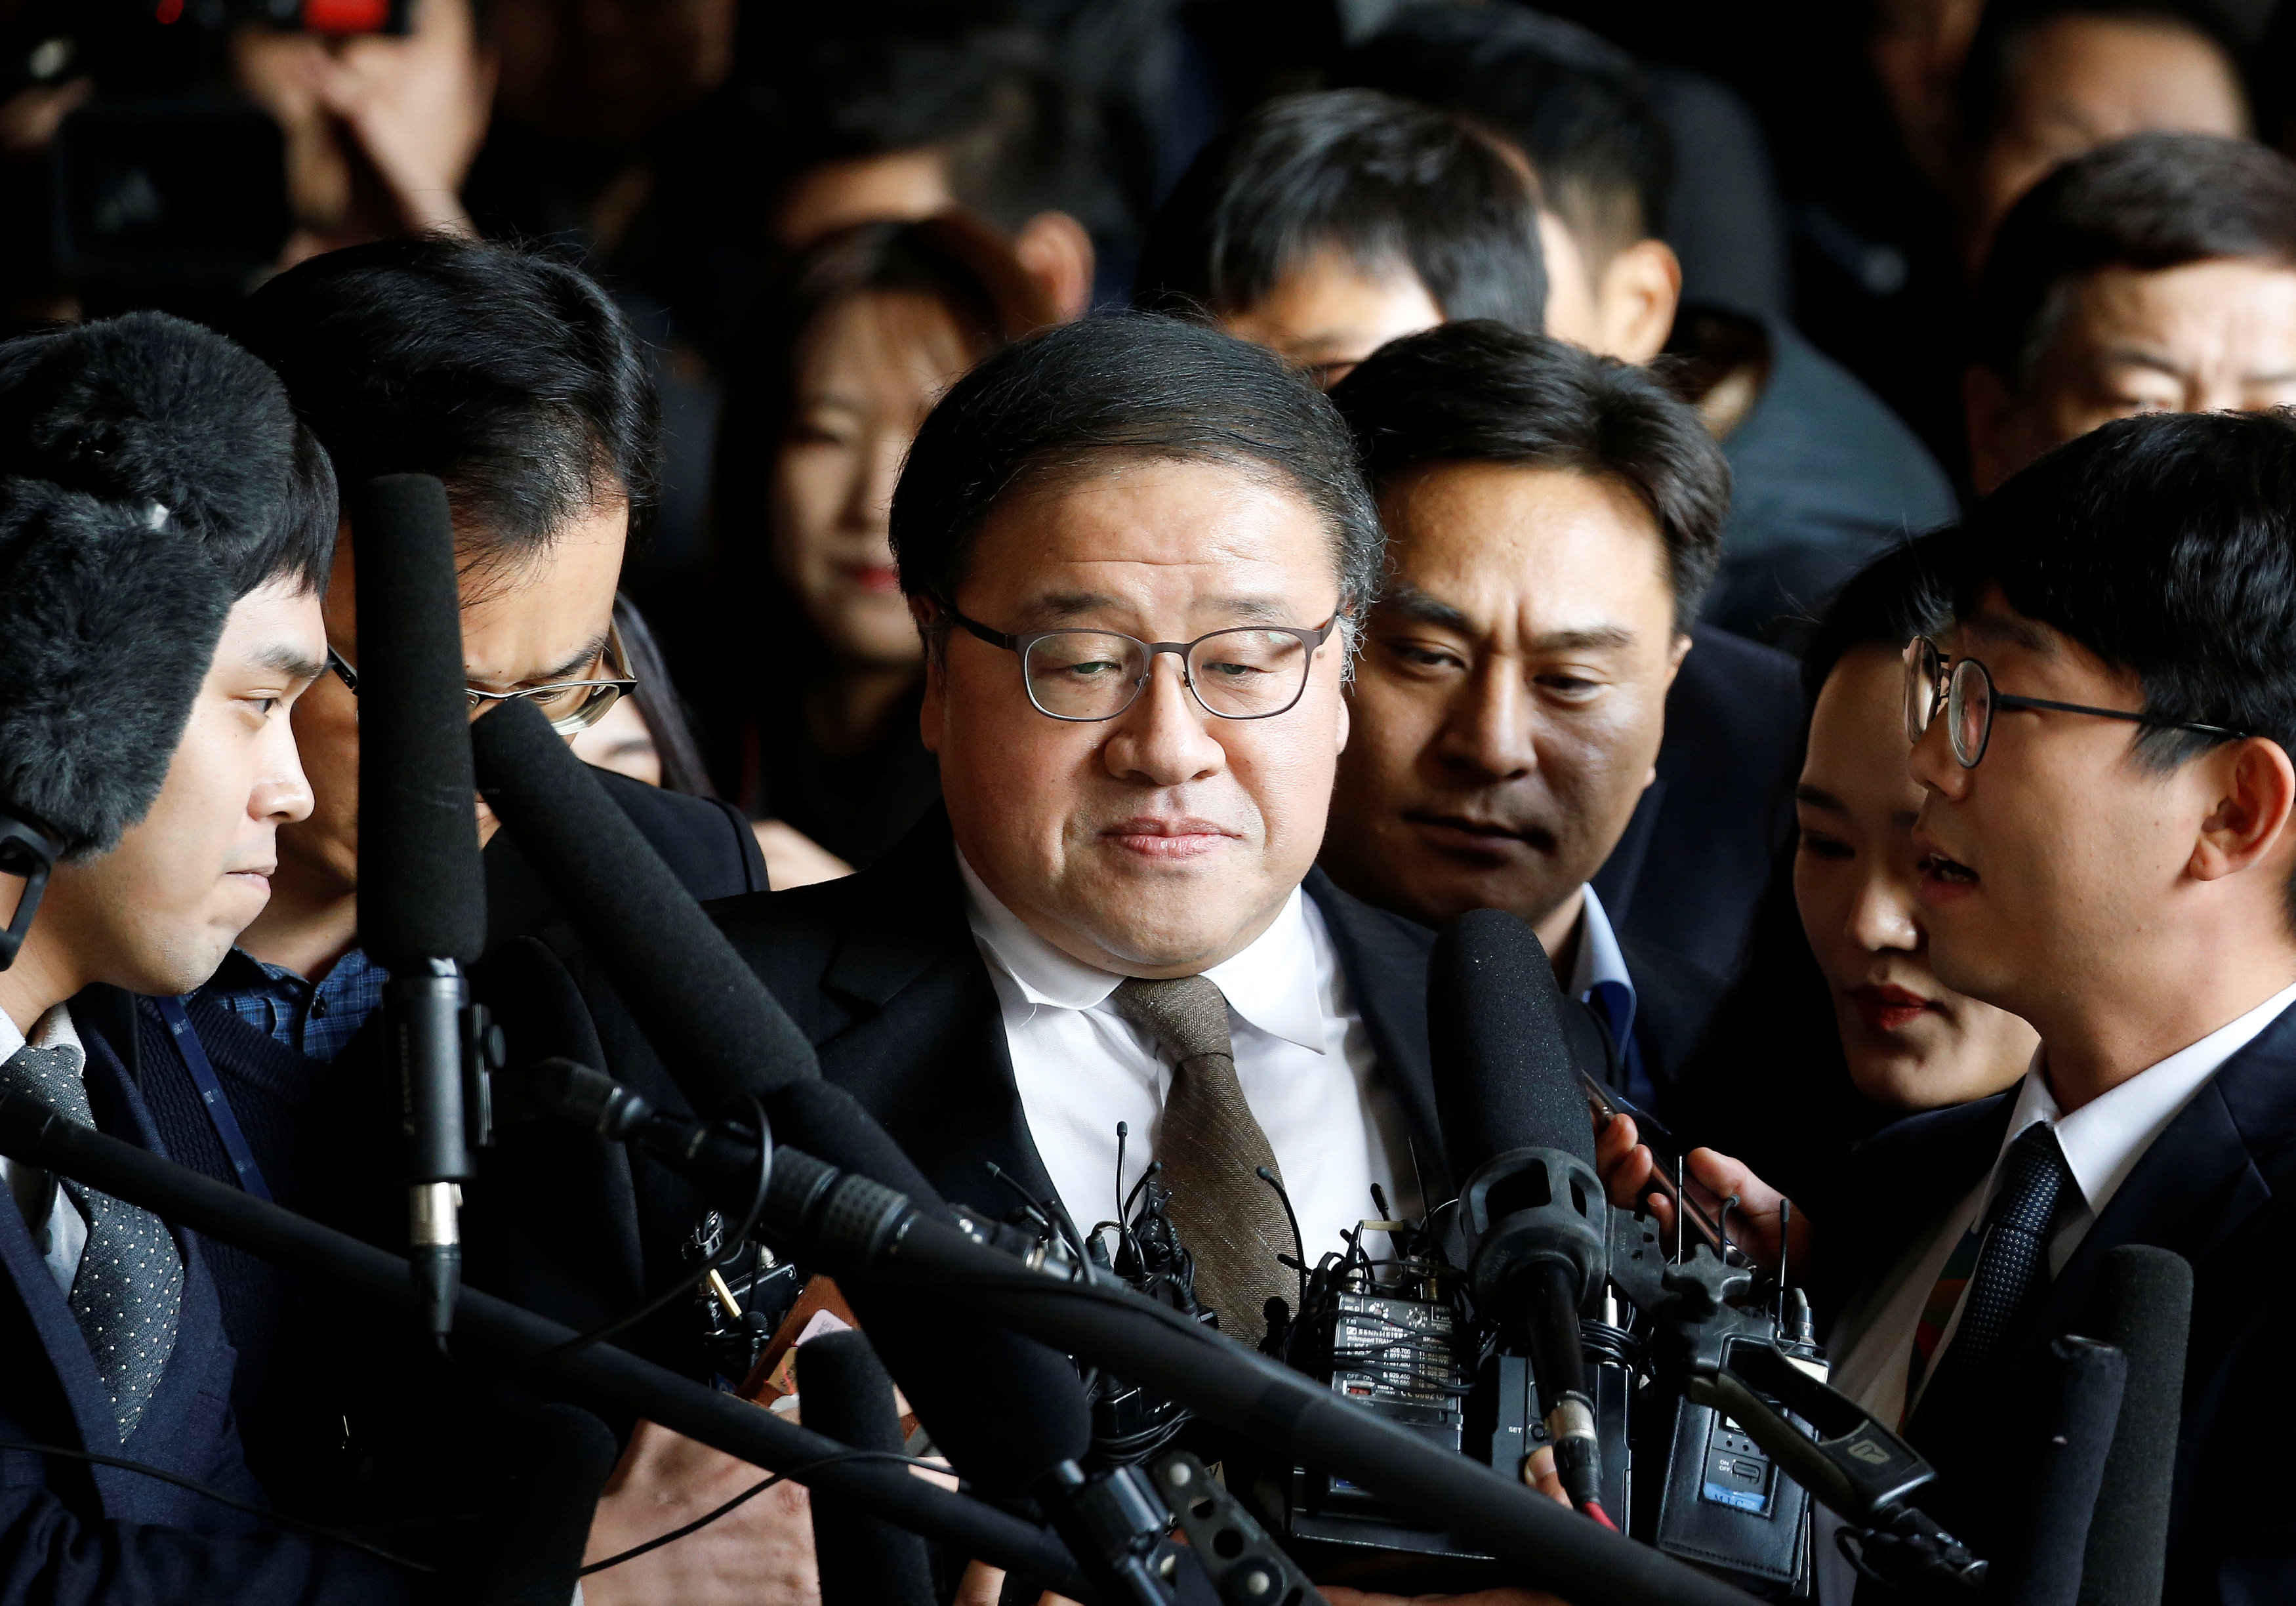 Former senior presidential secretary for policy coordination, Ahn Jong-beom, is surrounded by media as he arrives for questioning as part of the investigation into a political scandal involving President Park Geun-hye and Choi Soon-sil, at a prosecutor's 